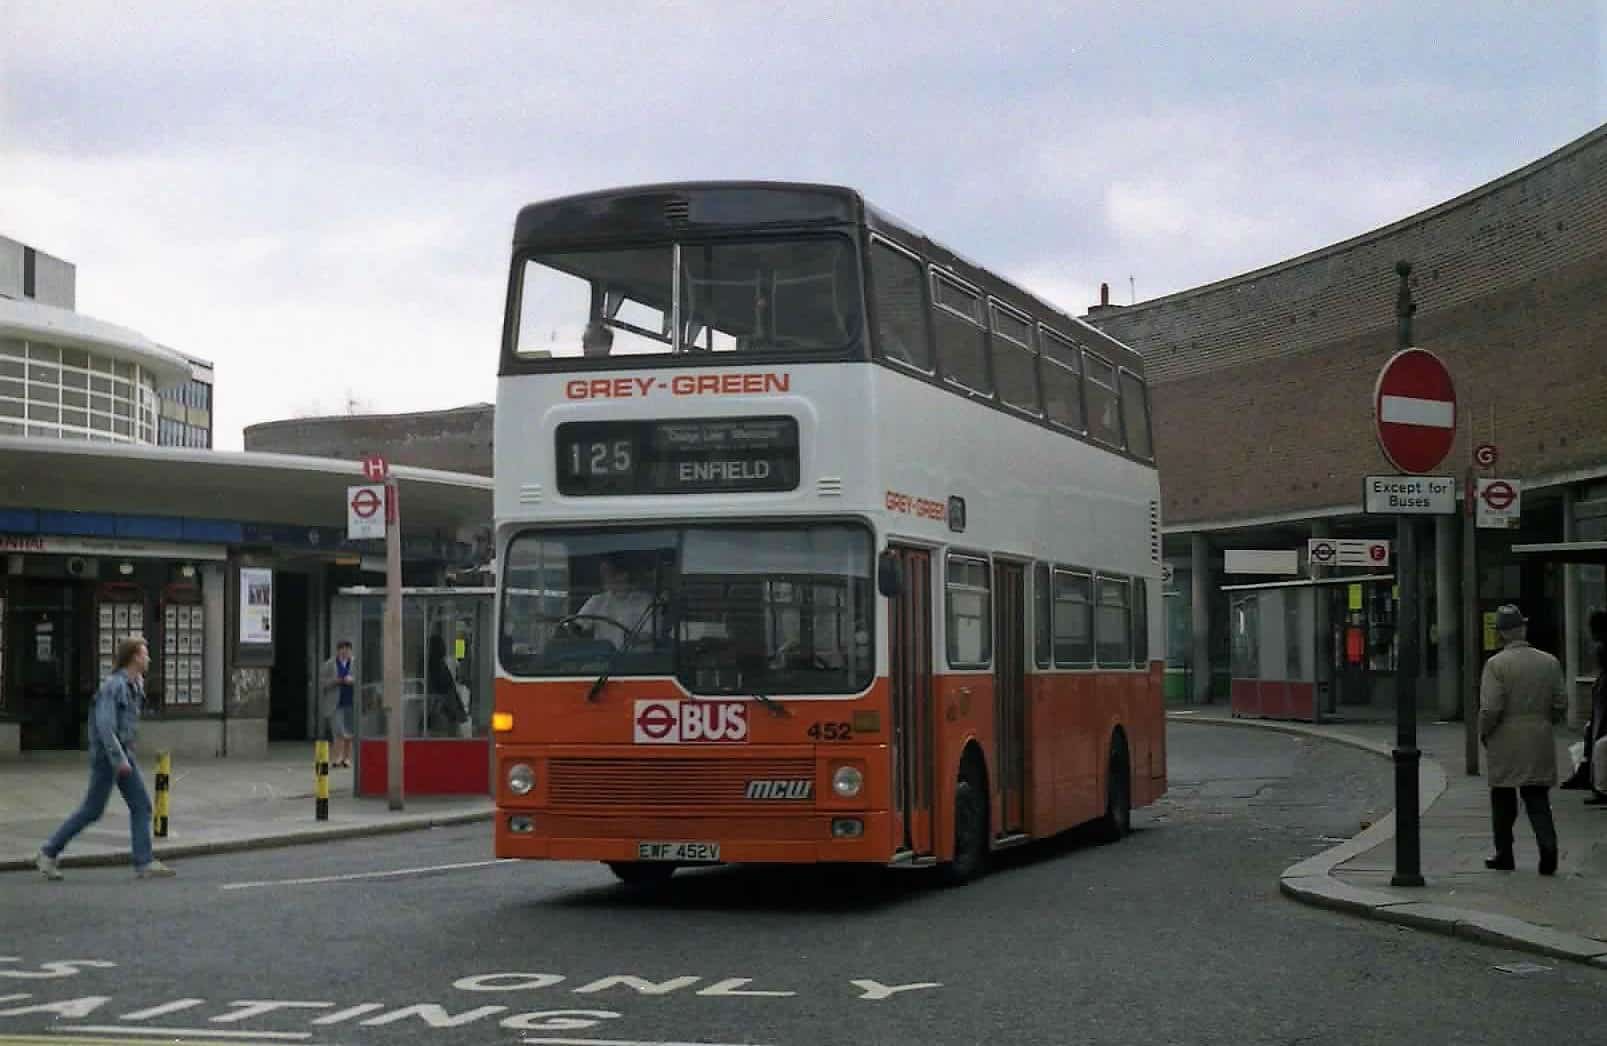 Grey Green began running the 125 service, seen here at Southgate Underground Station, in 1987